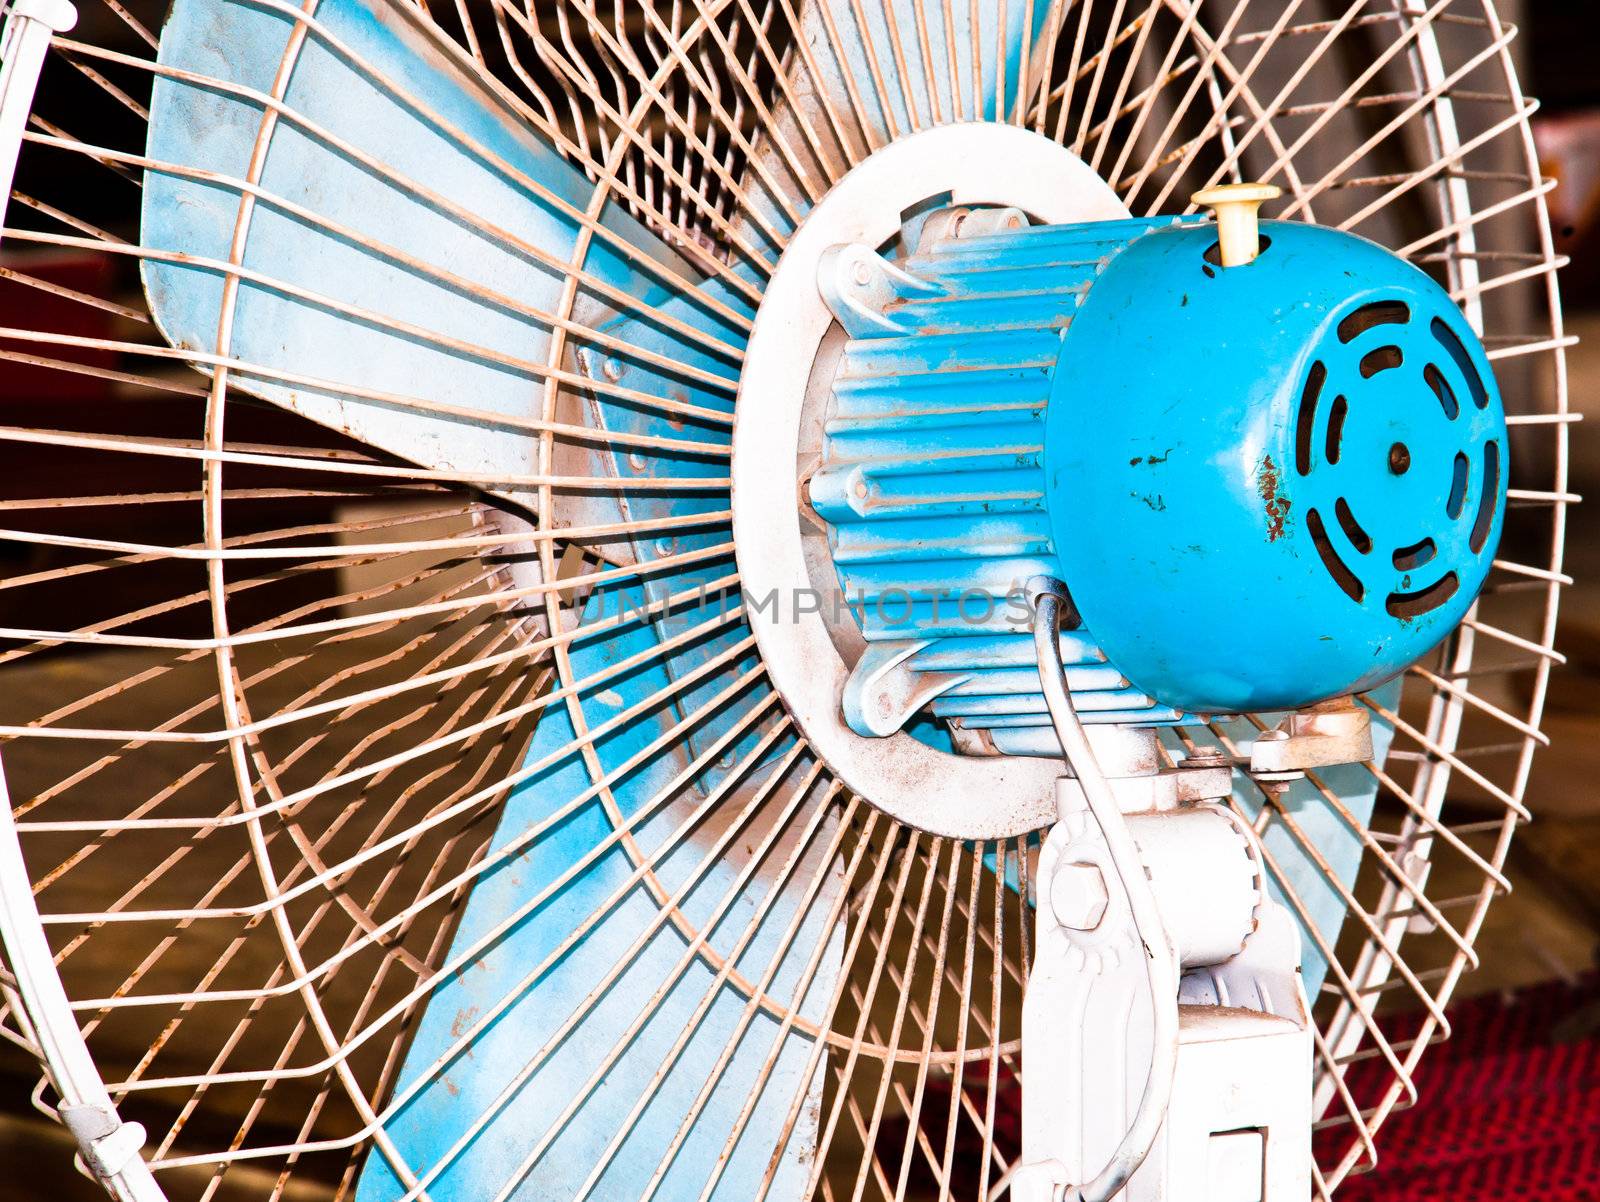 Electric fan. by Theeraphon